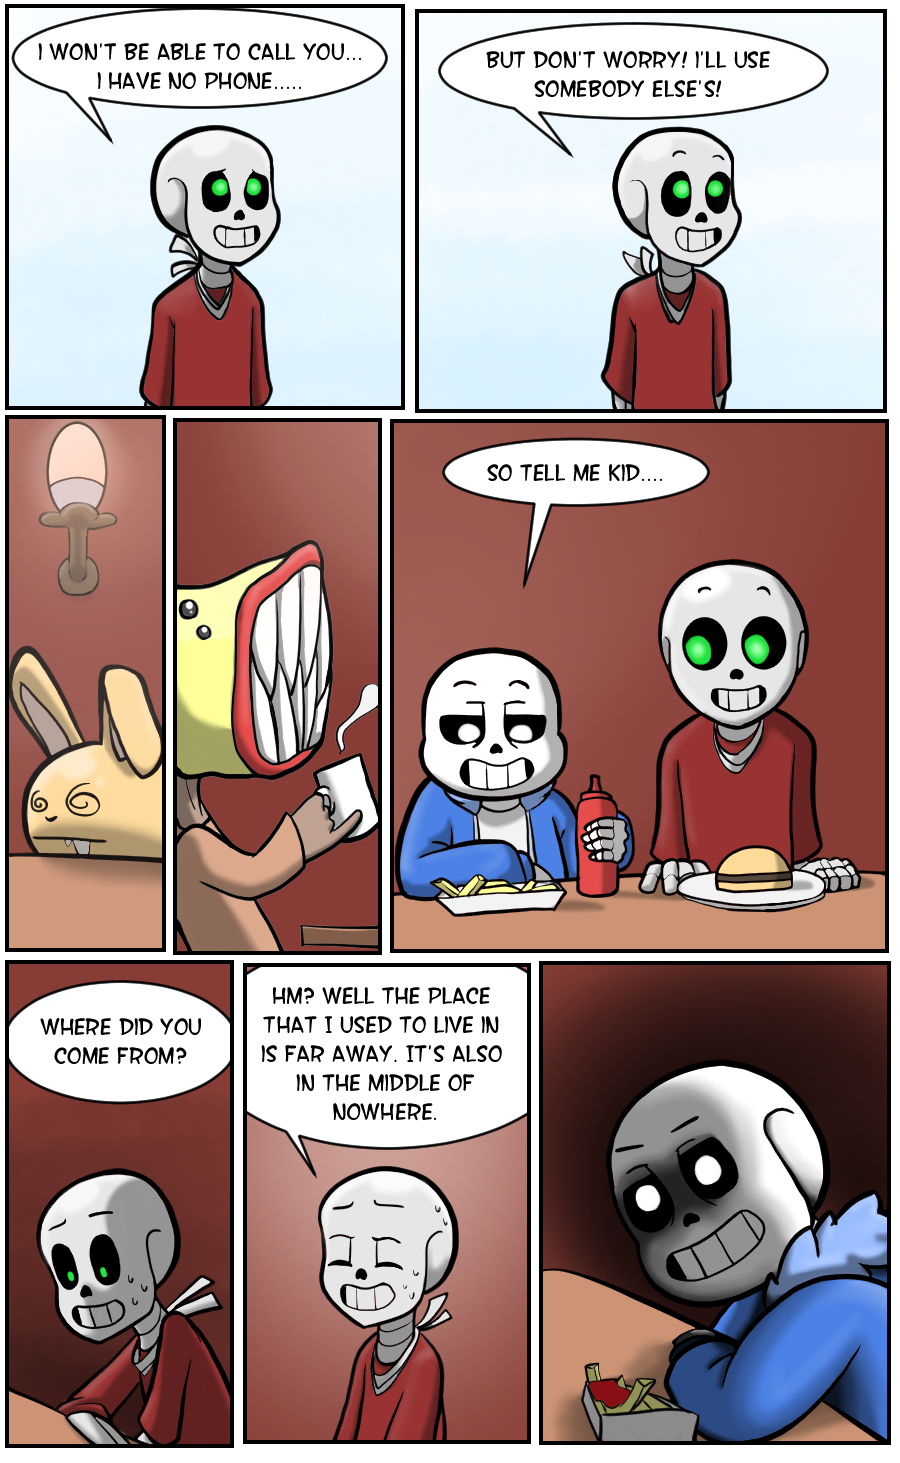 Undertale Green Chapter 2 Page 25 by FlamingReaperComic on DeviantArt